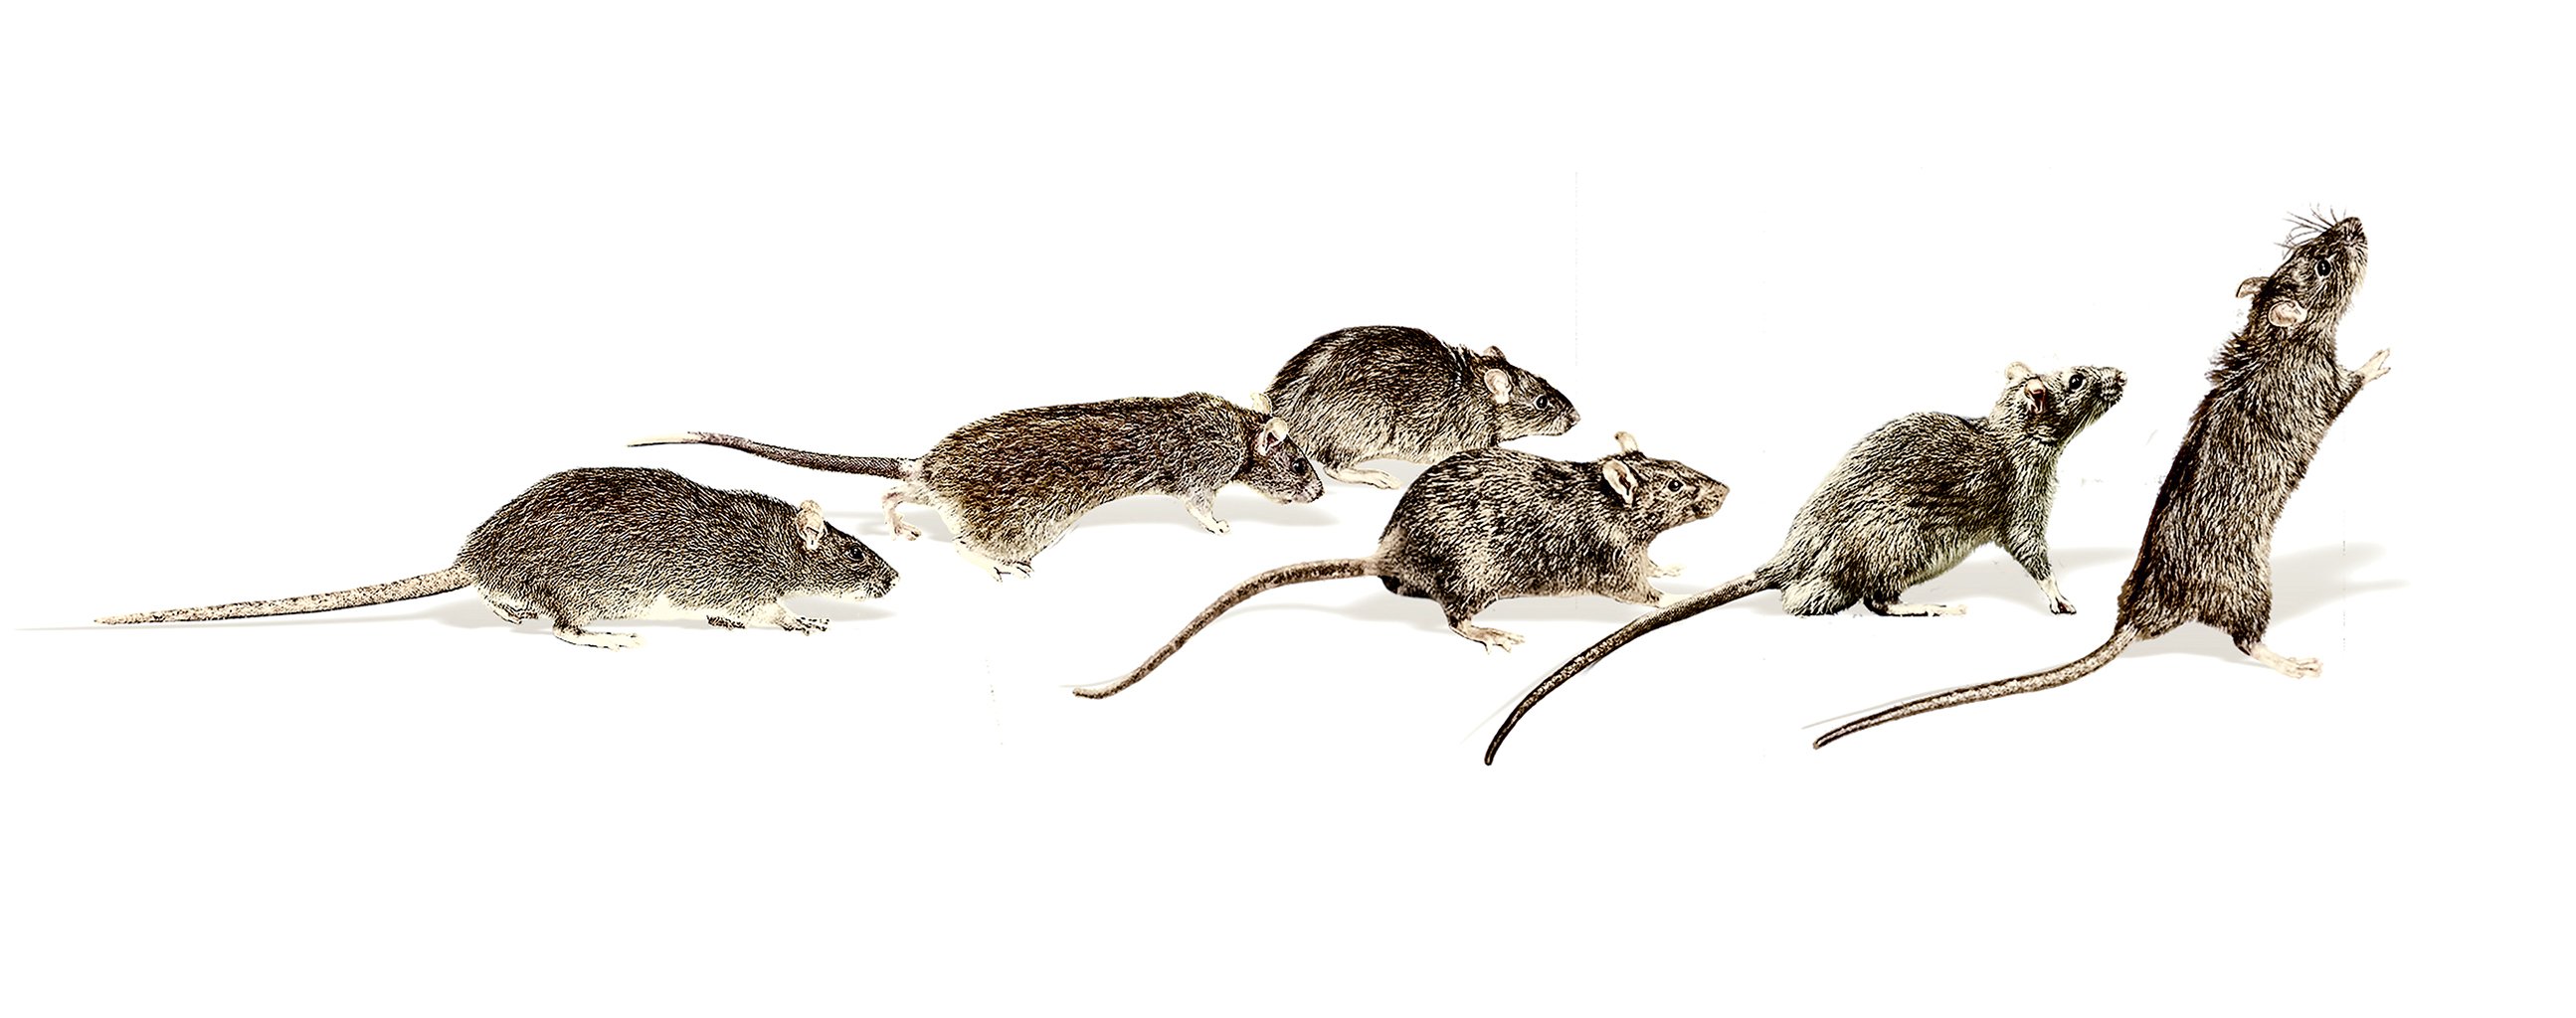 The Rats Are Taking Over DC! - Washingtonian